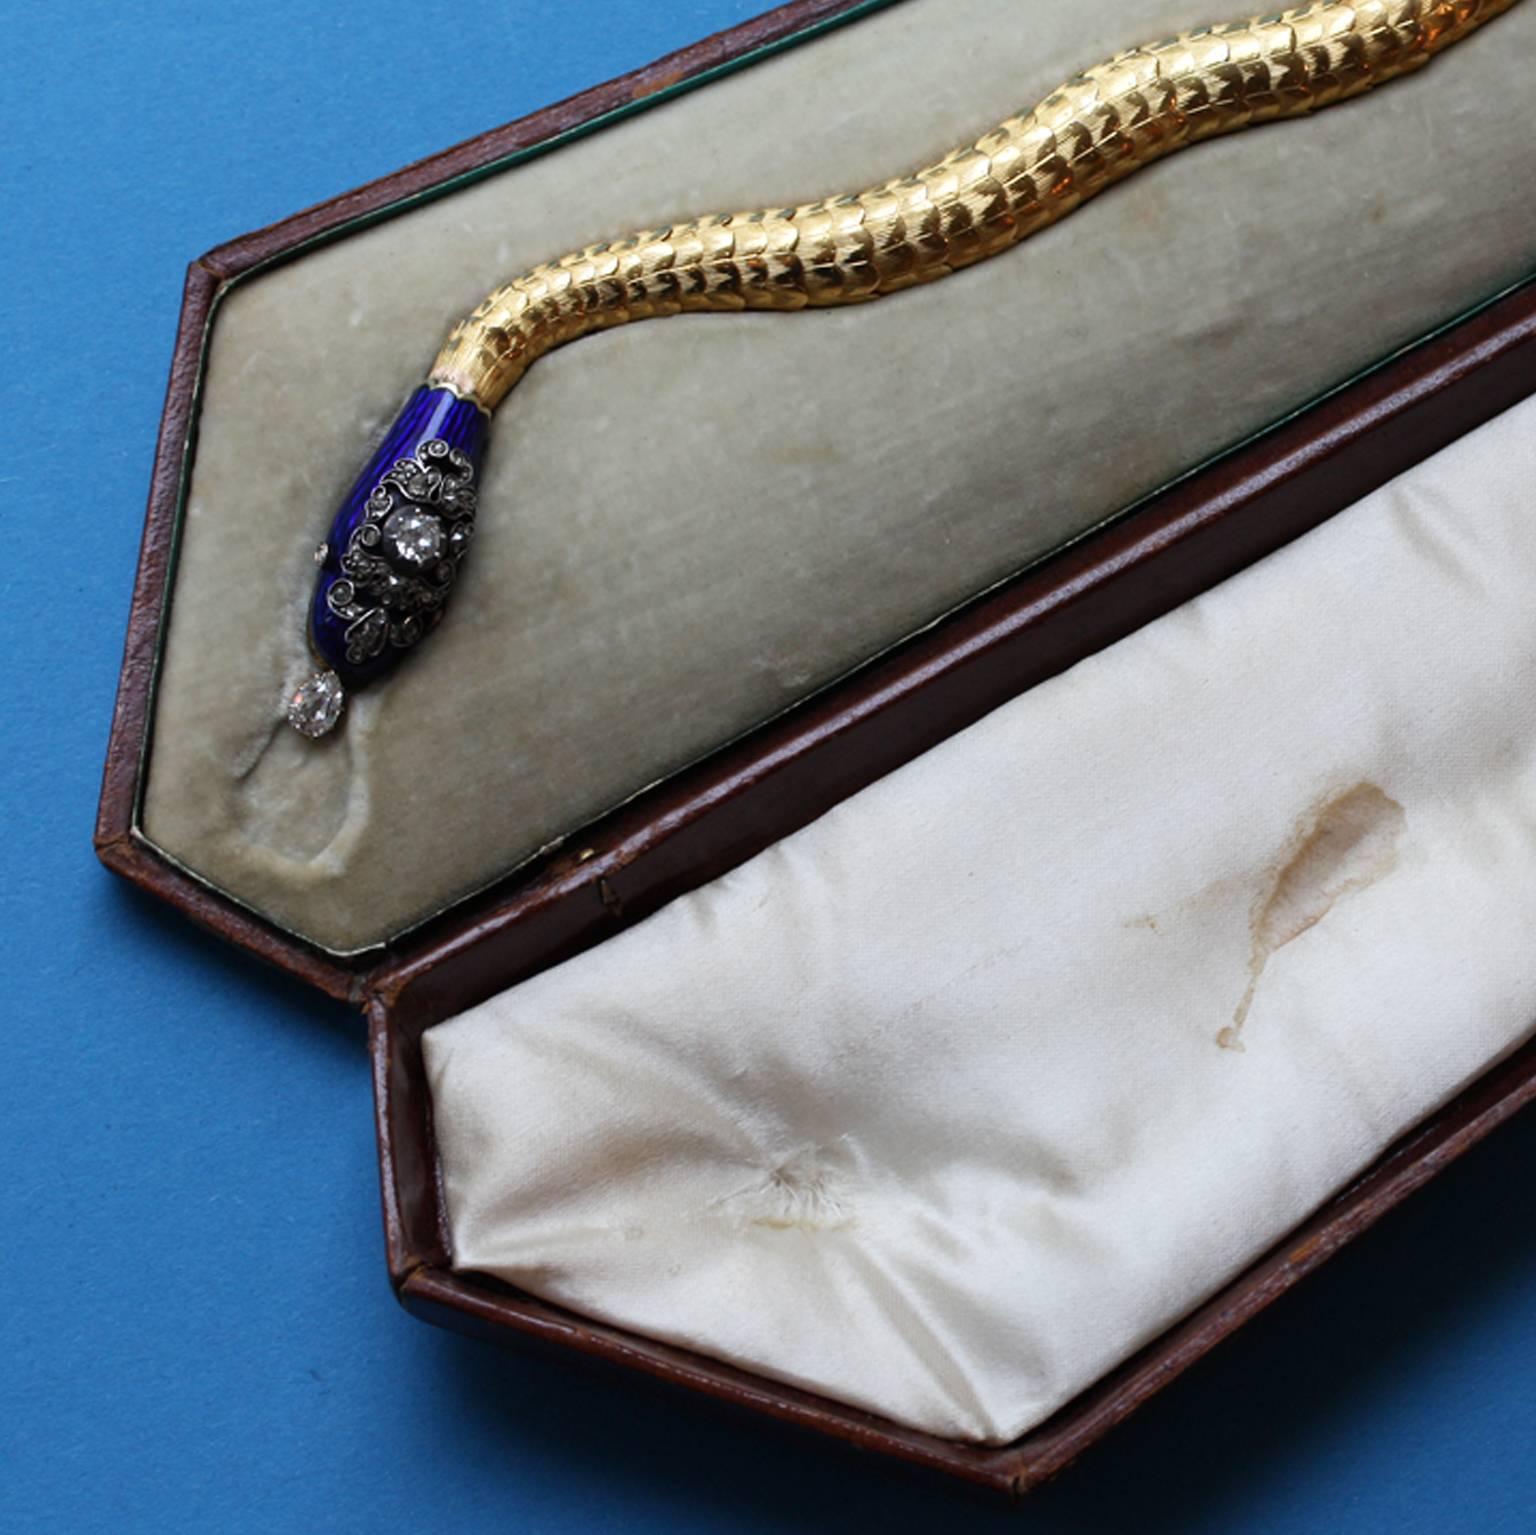 A gold snake bracelet with an enamel and diamond head, a – later replaced – pear shaped diamond suspends from its jaws, with a concealed clasp and in its original coffin shaped case, England, circa 1840.

weight: 38 grams

Illustrated in